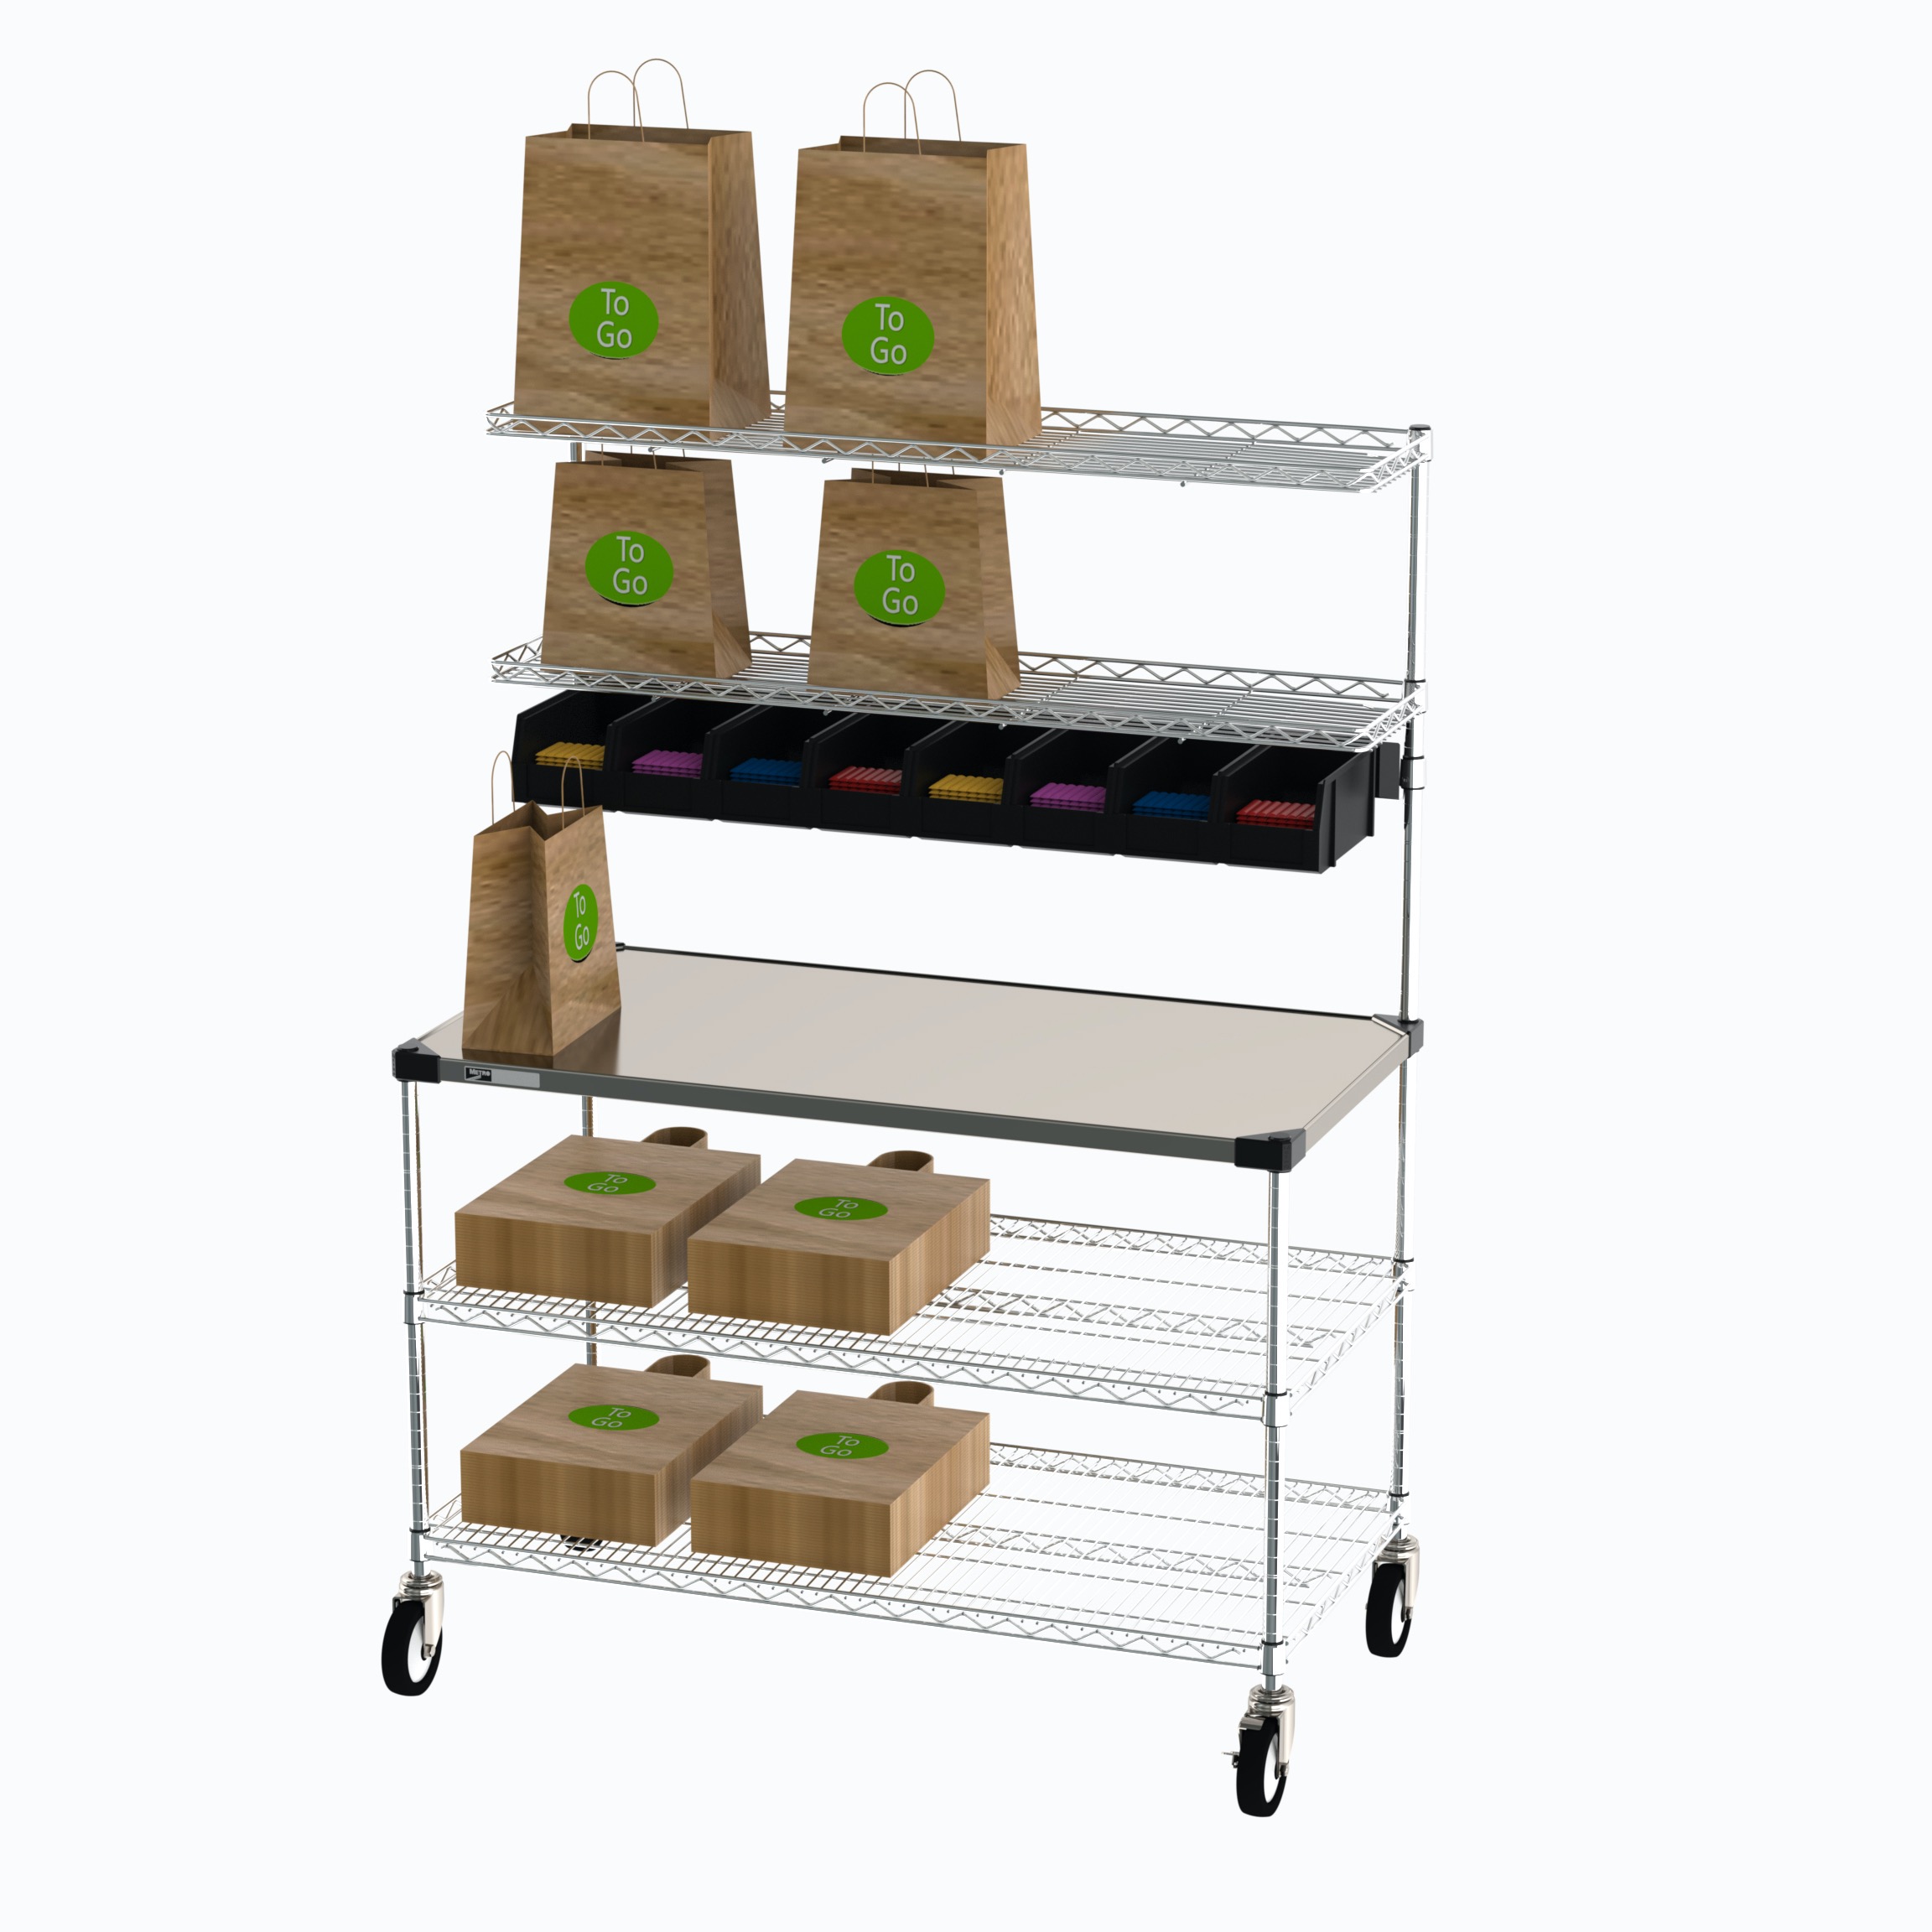 SHELVING UNIT TO-GO DELIVERY STAGING / DRIVE-THRU, LARGE, 24 X 48